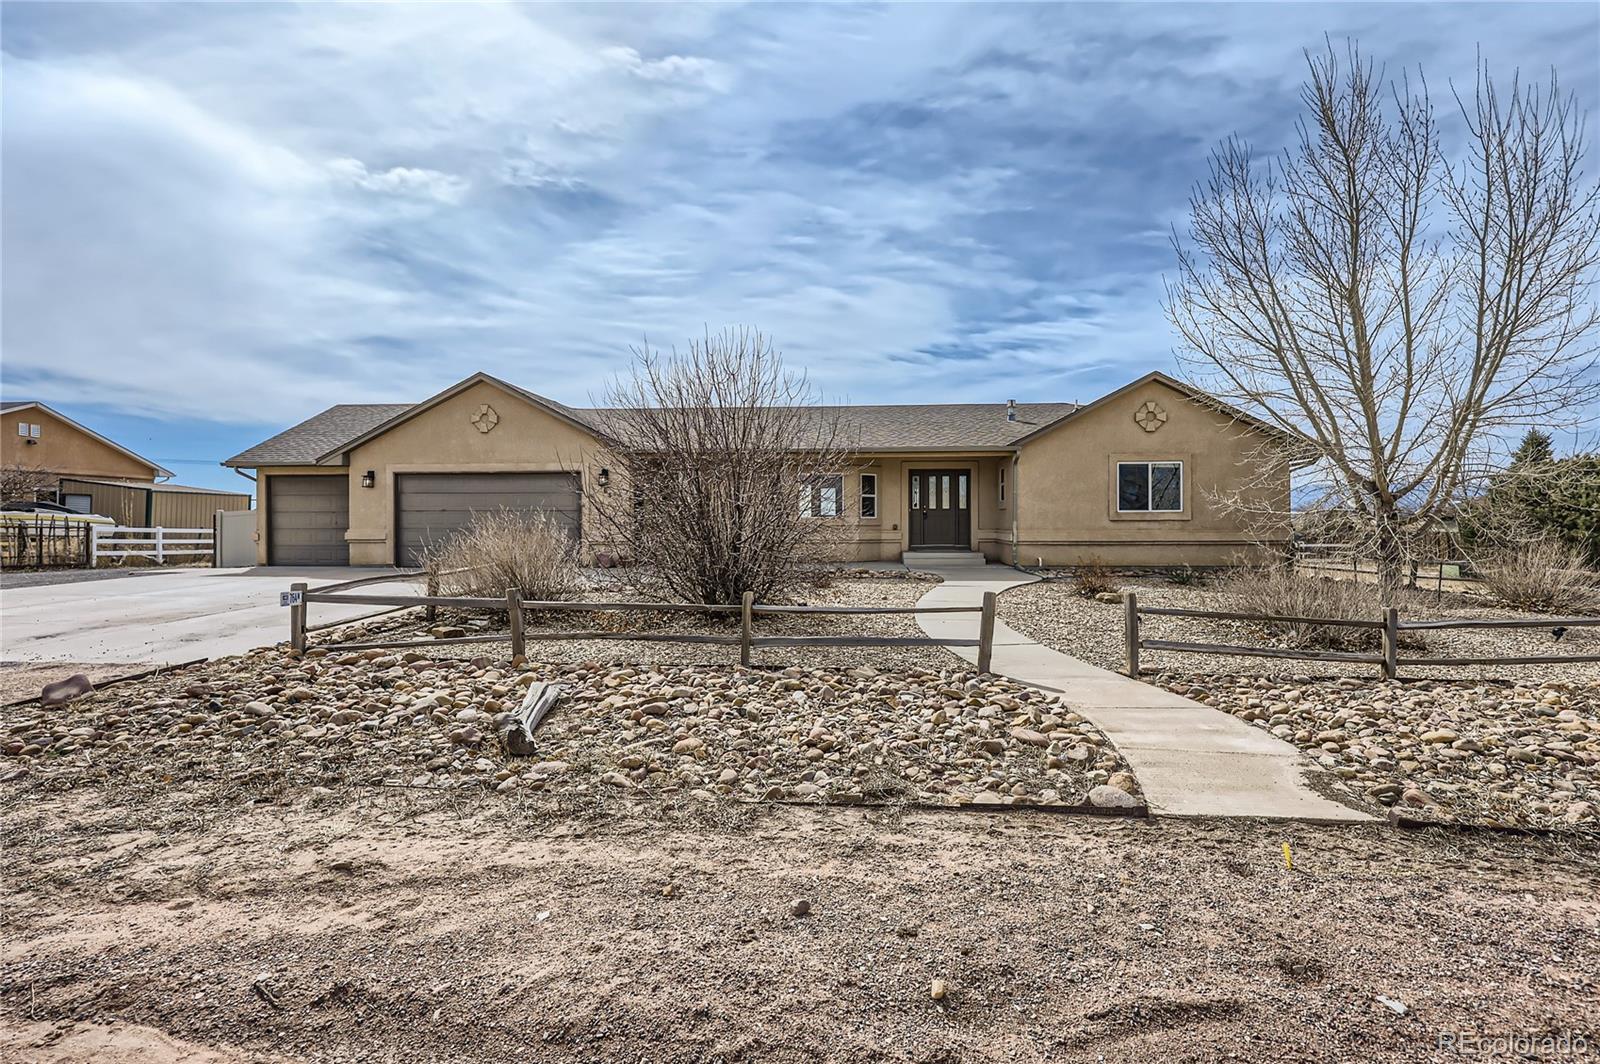 764 w cambria drive, pueblo west sold home. Closed on 2024-06-20 for $480,000.